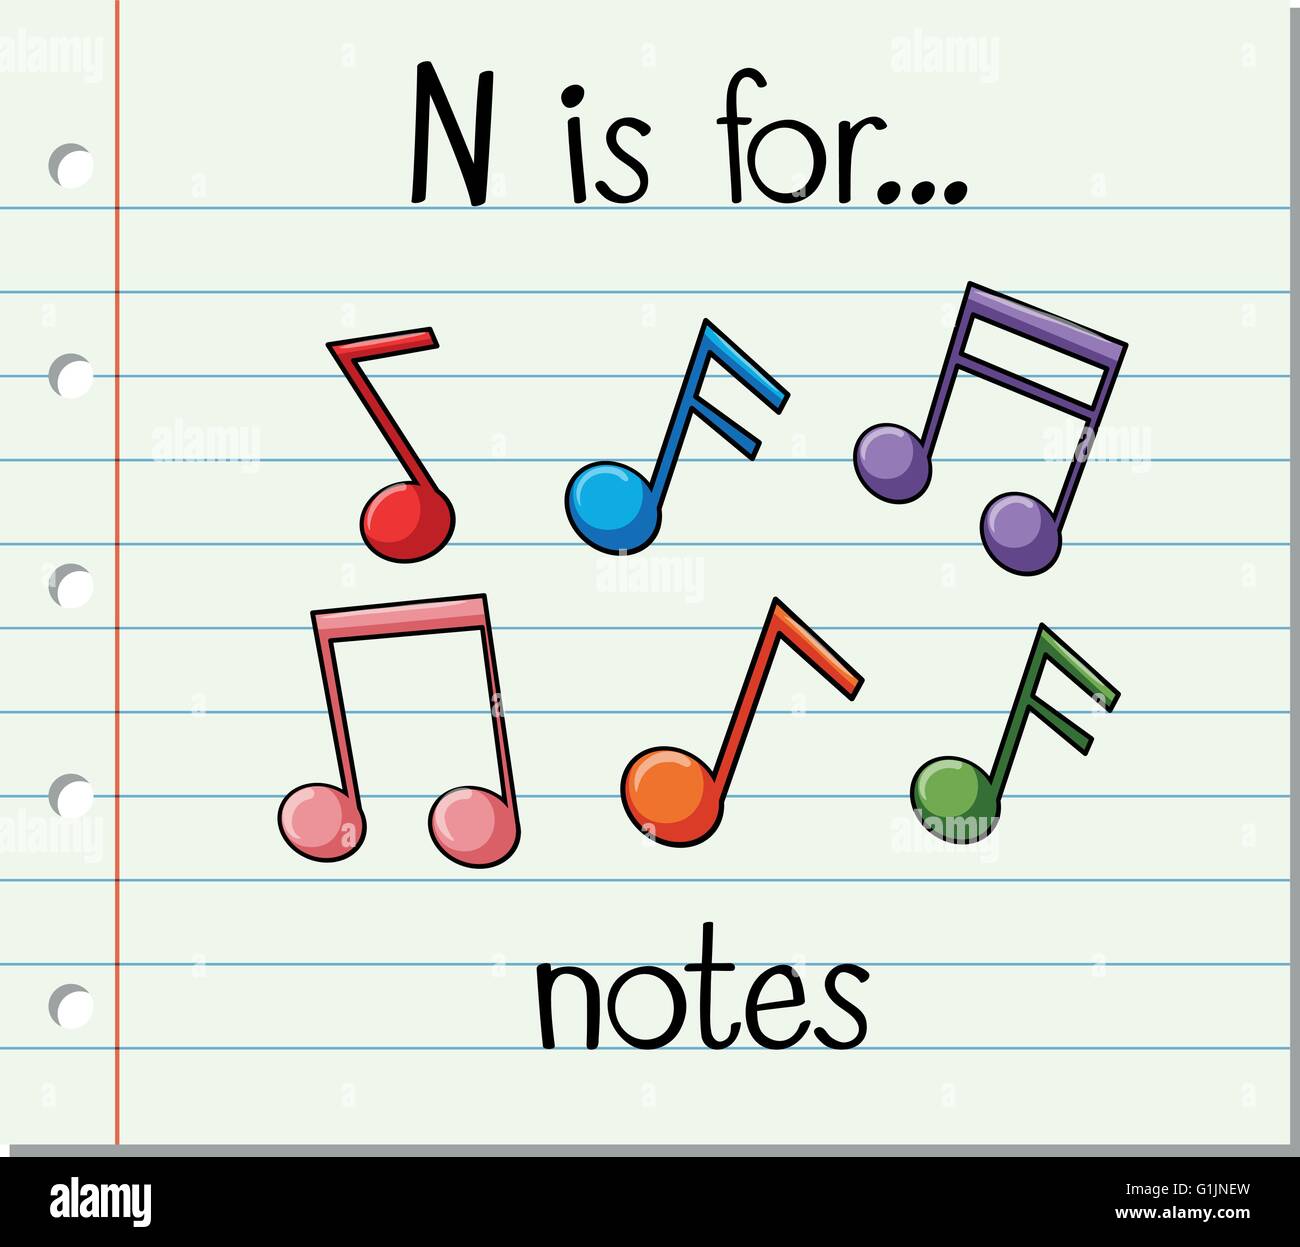 Flashcard letter N is for notes illustration Stock Vector